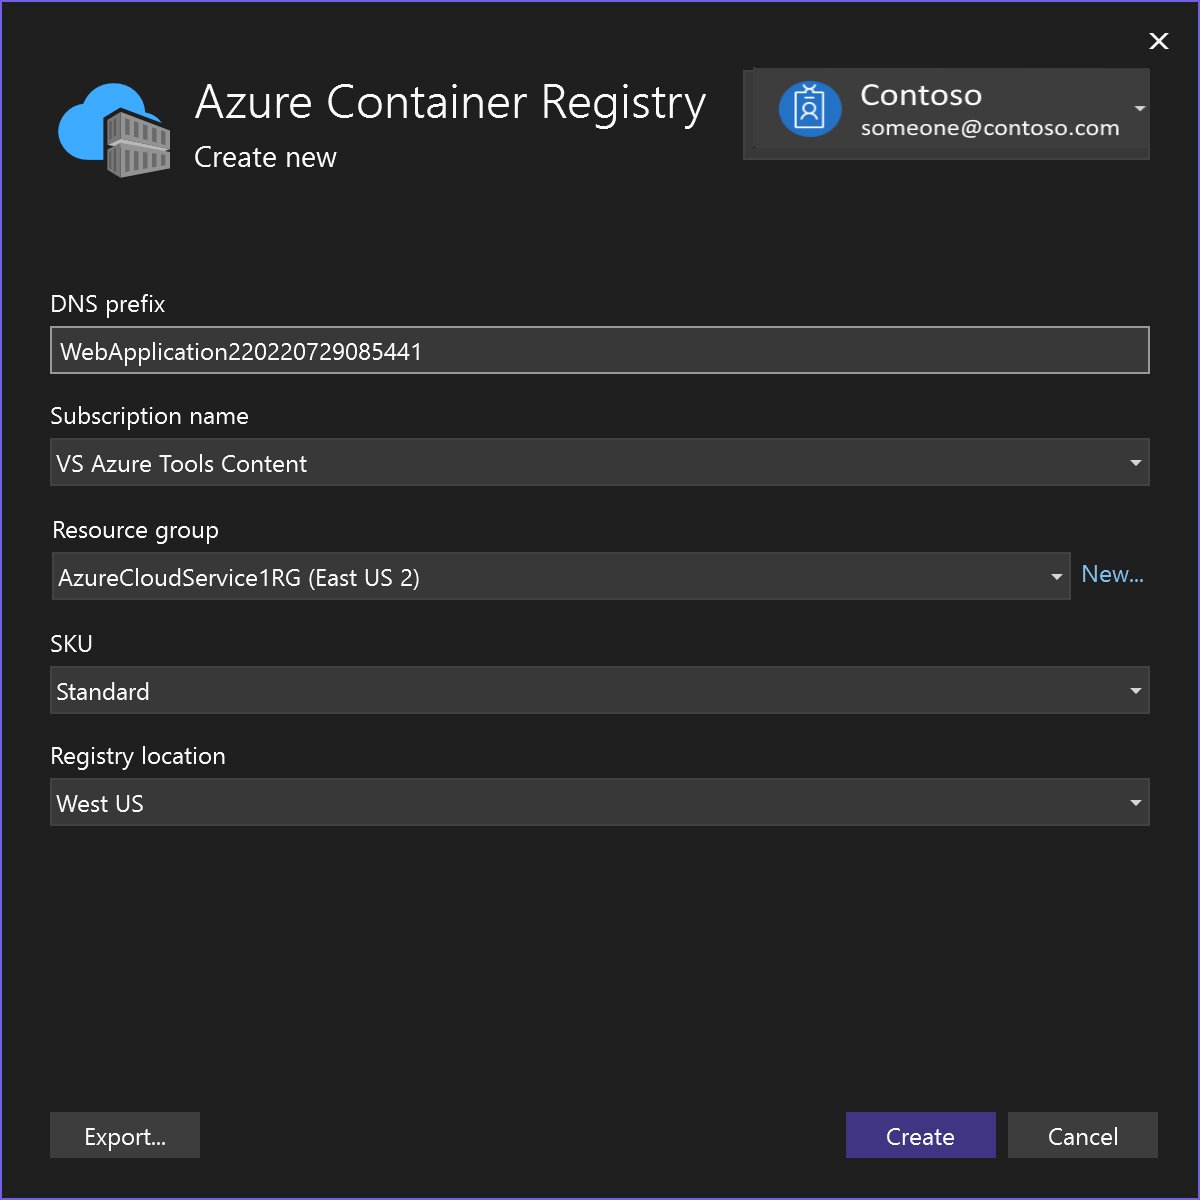 Screenshot showing Azure Container Registry options.